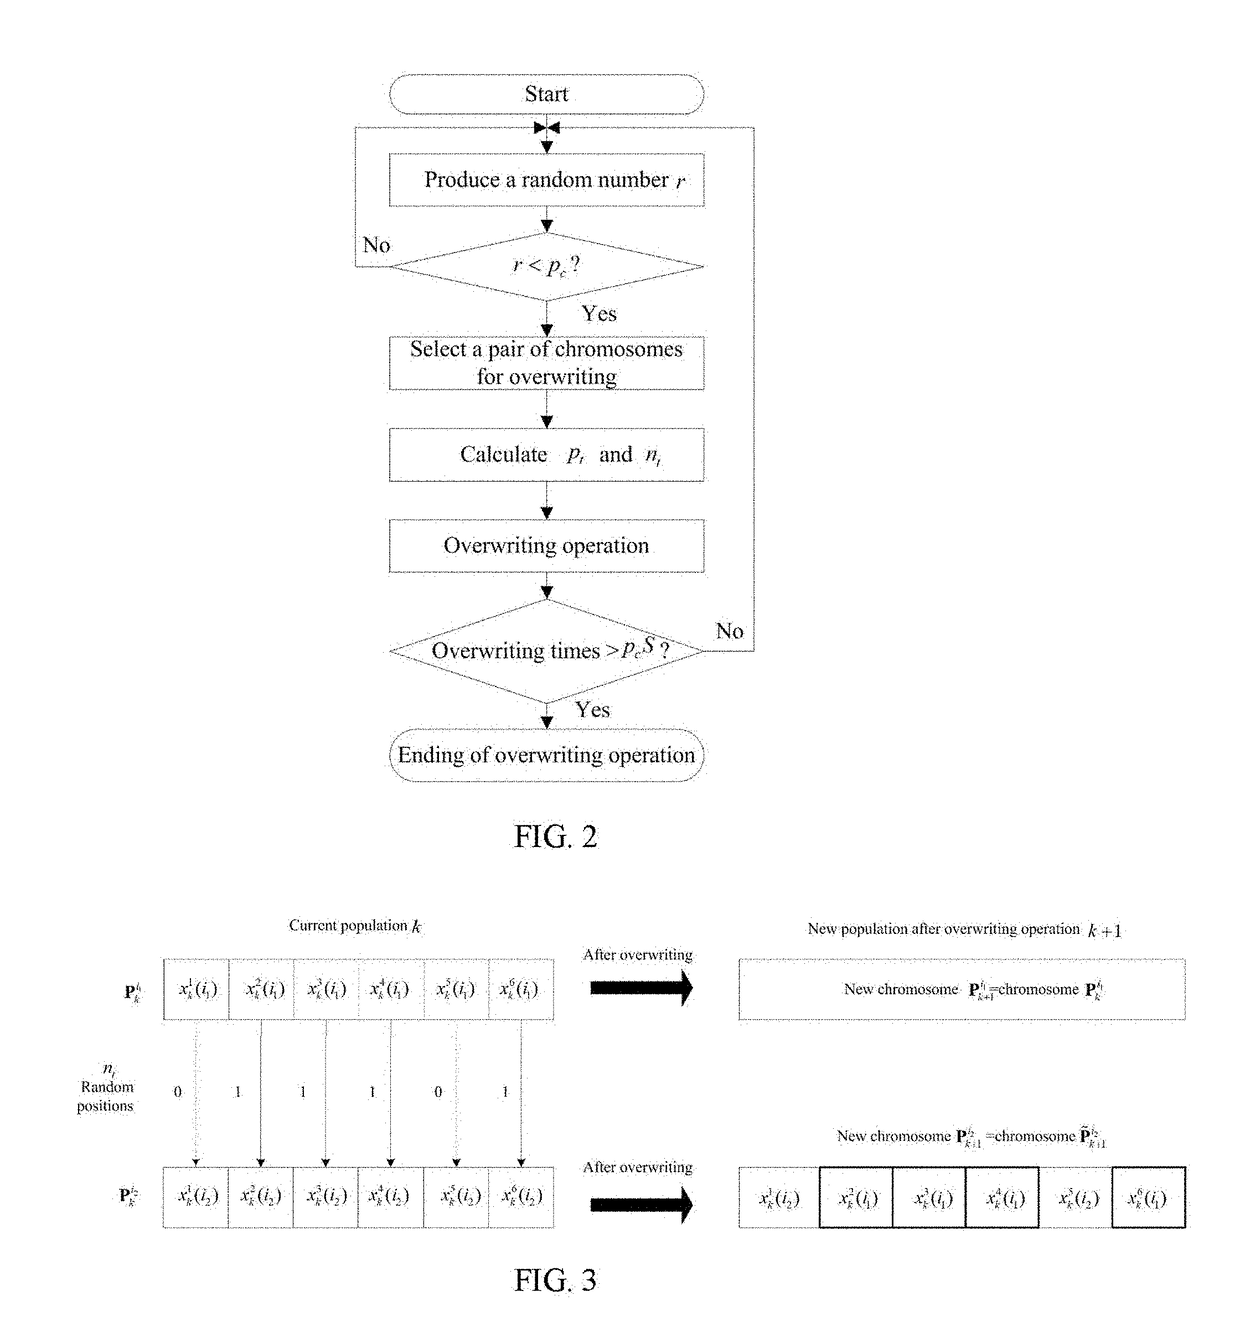 Global optimization, search and machine learning method based on the lamarckian principle of inheritance of acquired characteristics